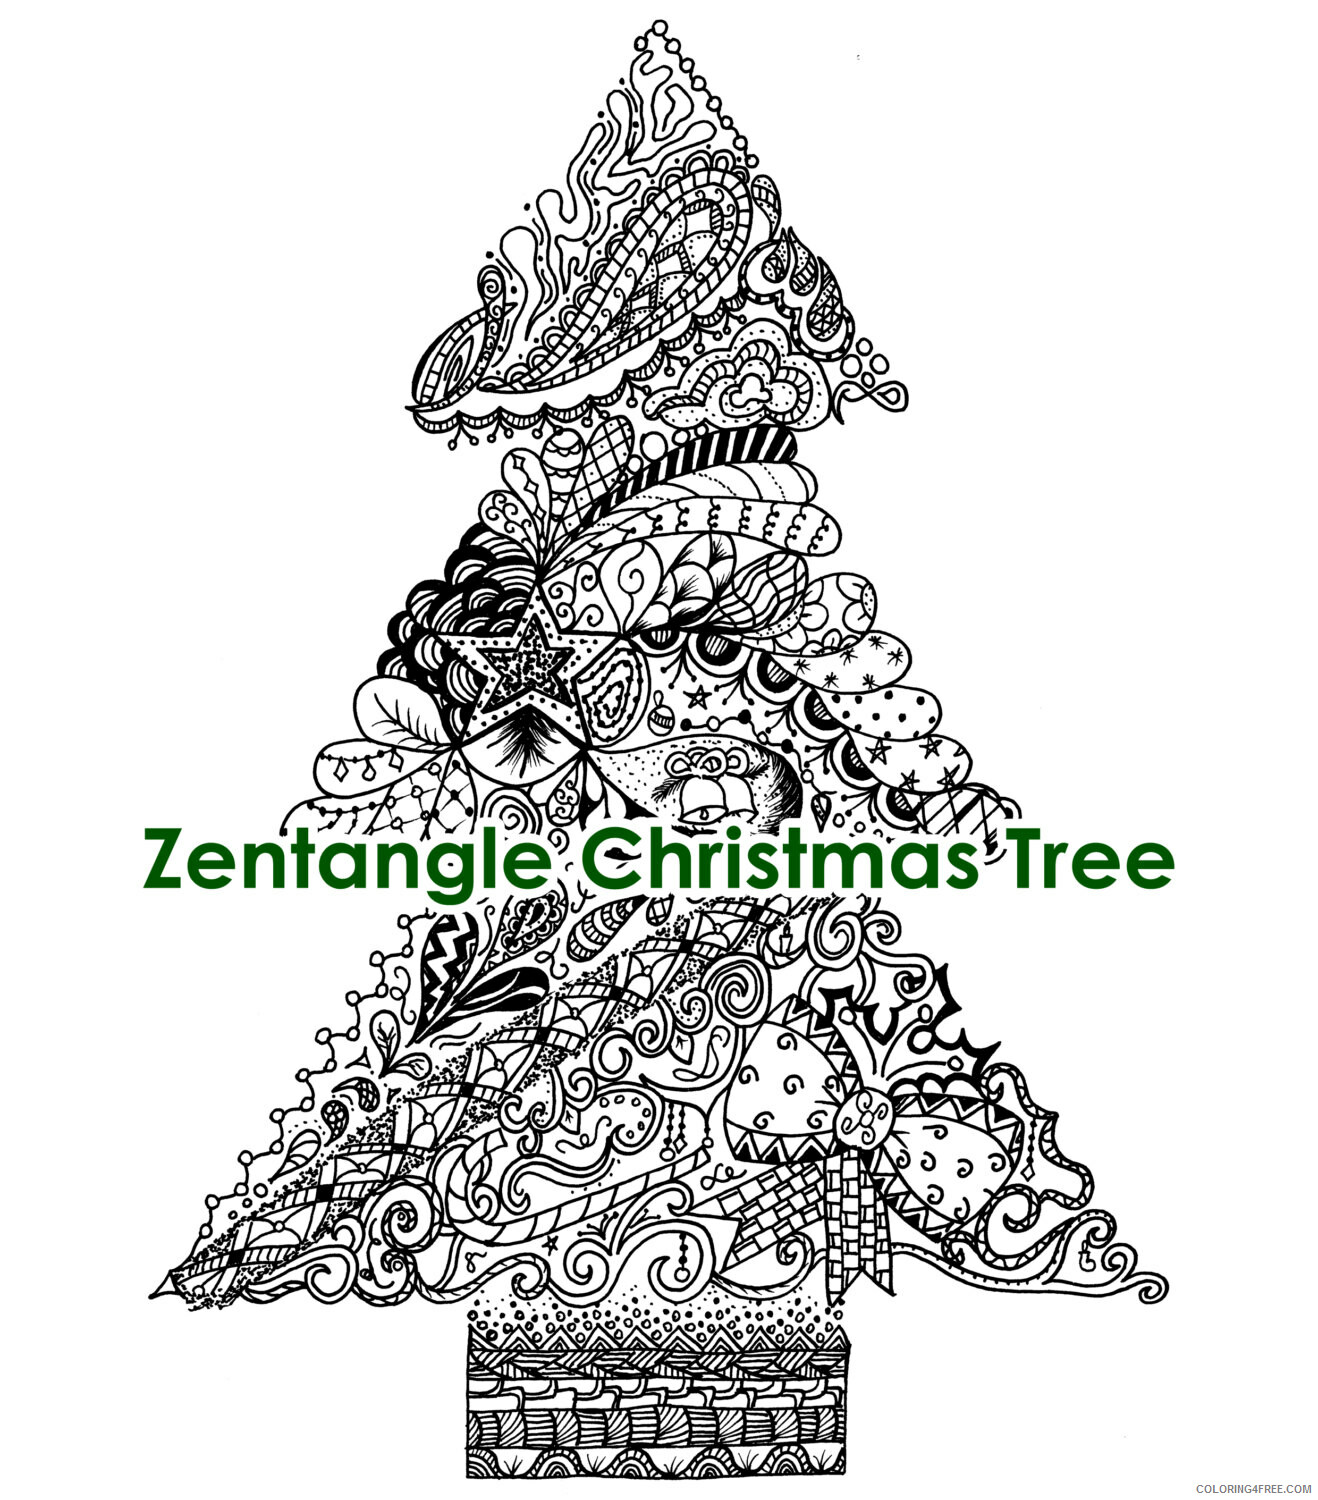 Tree Zentangle Coloring Pages Zentangle Christmas Tree Printable 2020 852 Coloring4free Coloring4free Com